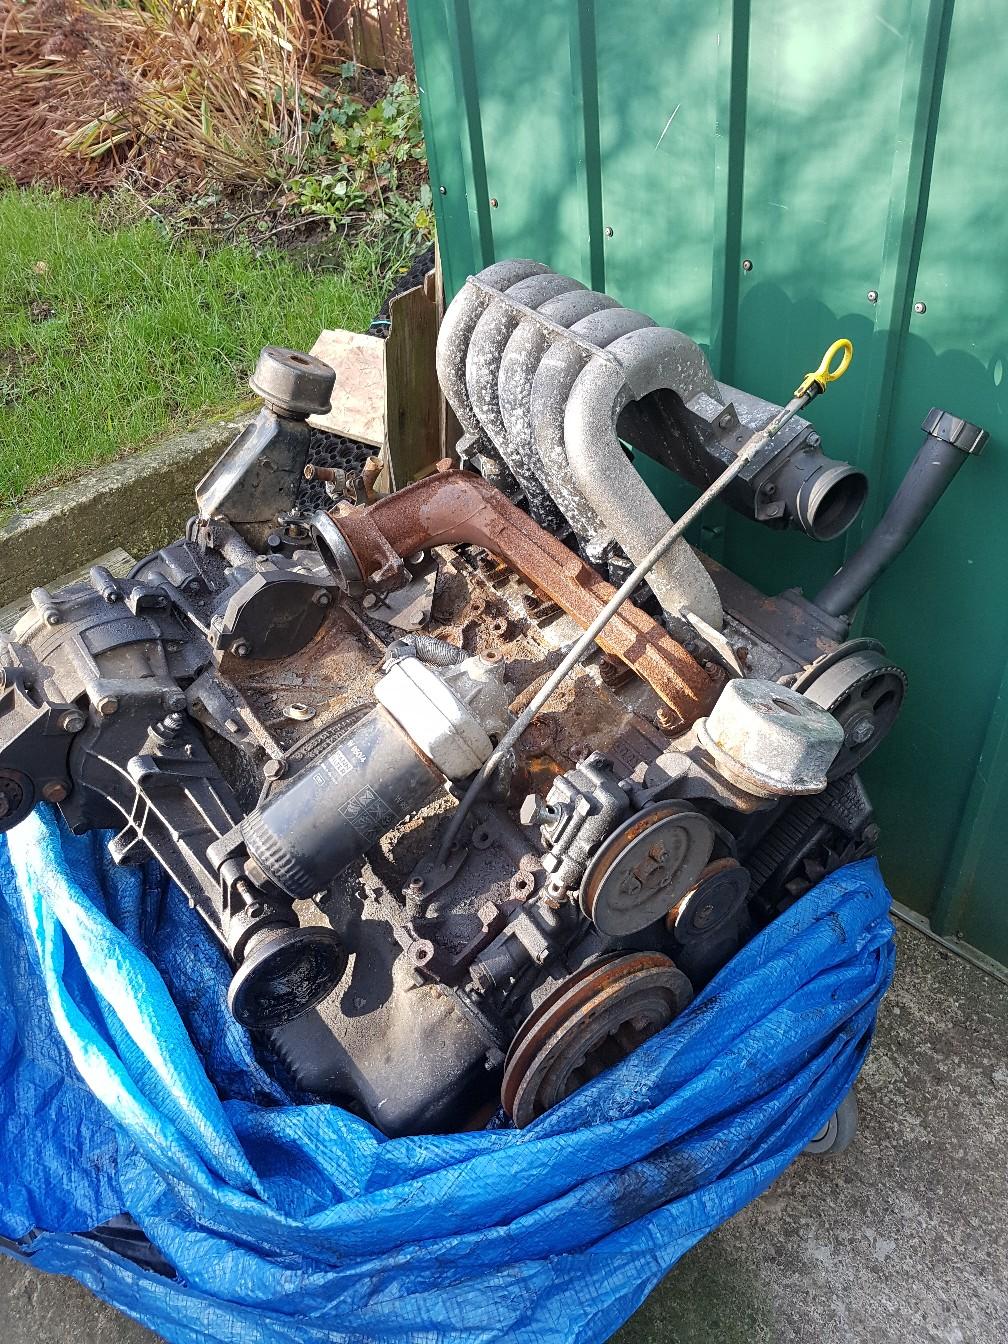 Vw t4 2.4 engine and gearbox in DL5 for £350.00 for sale